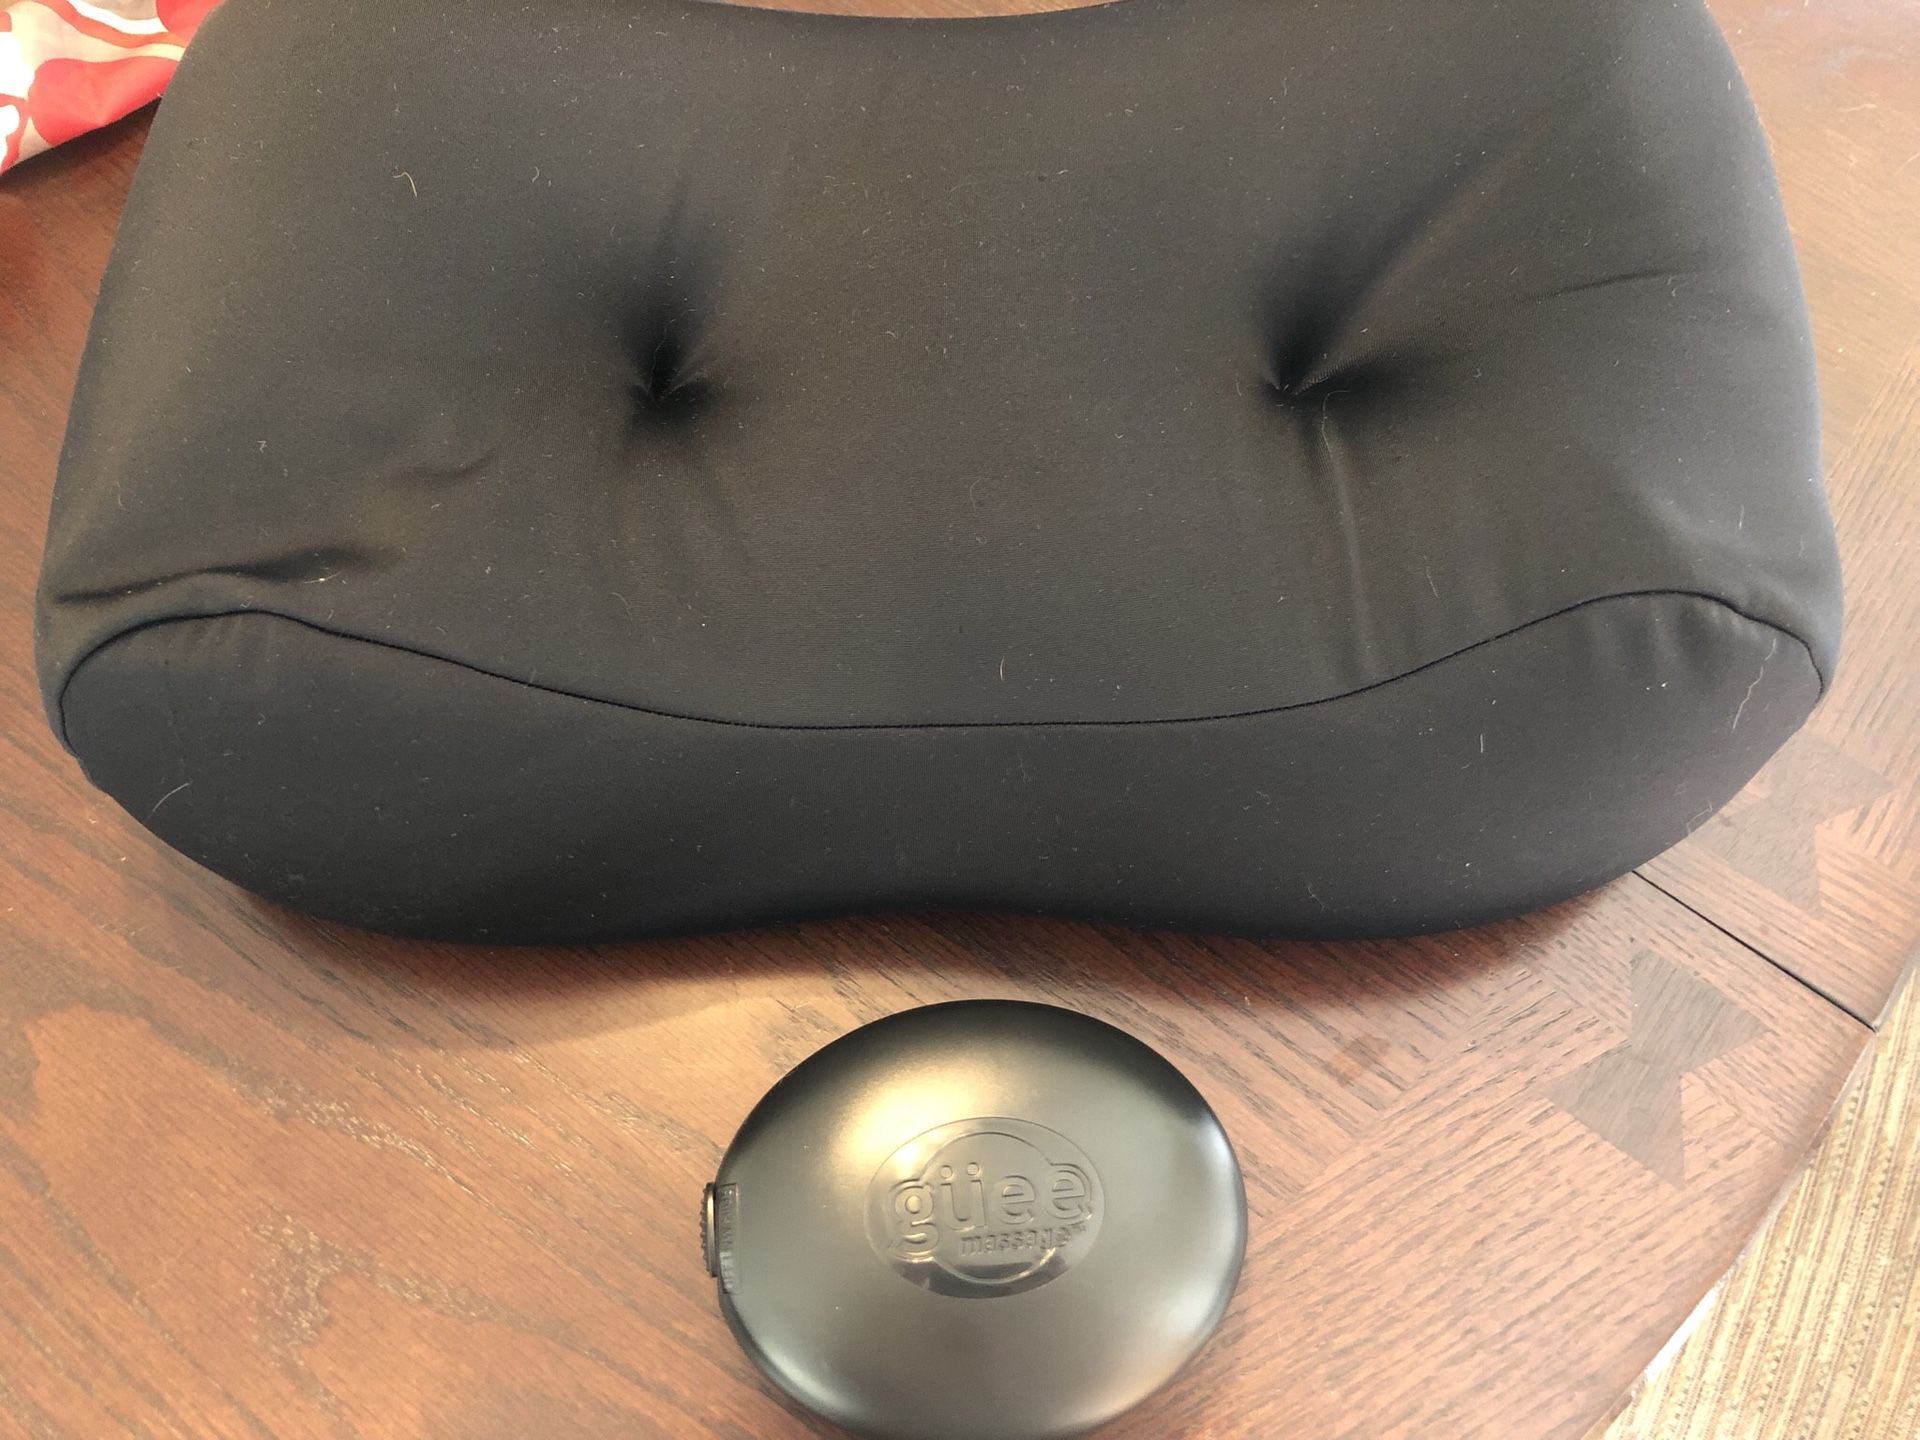 RBX Wireless Rechargeable Neck Massage Pillow Travel Ready with Heat for  Sale in Orange, CA - OfferUp